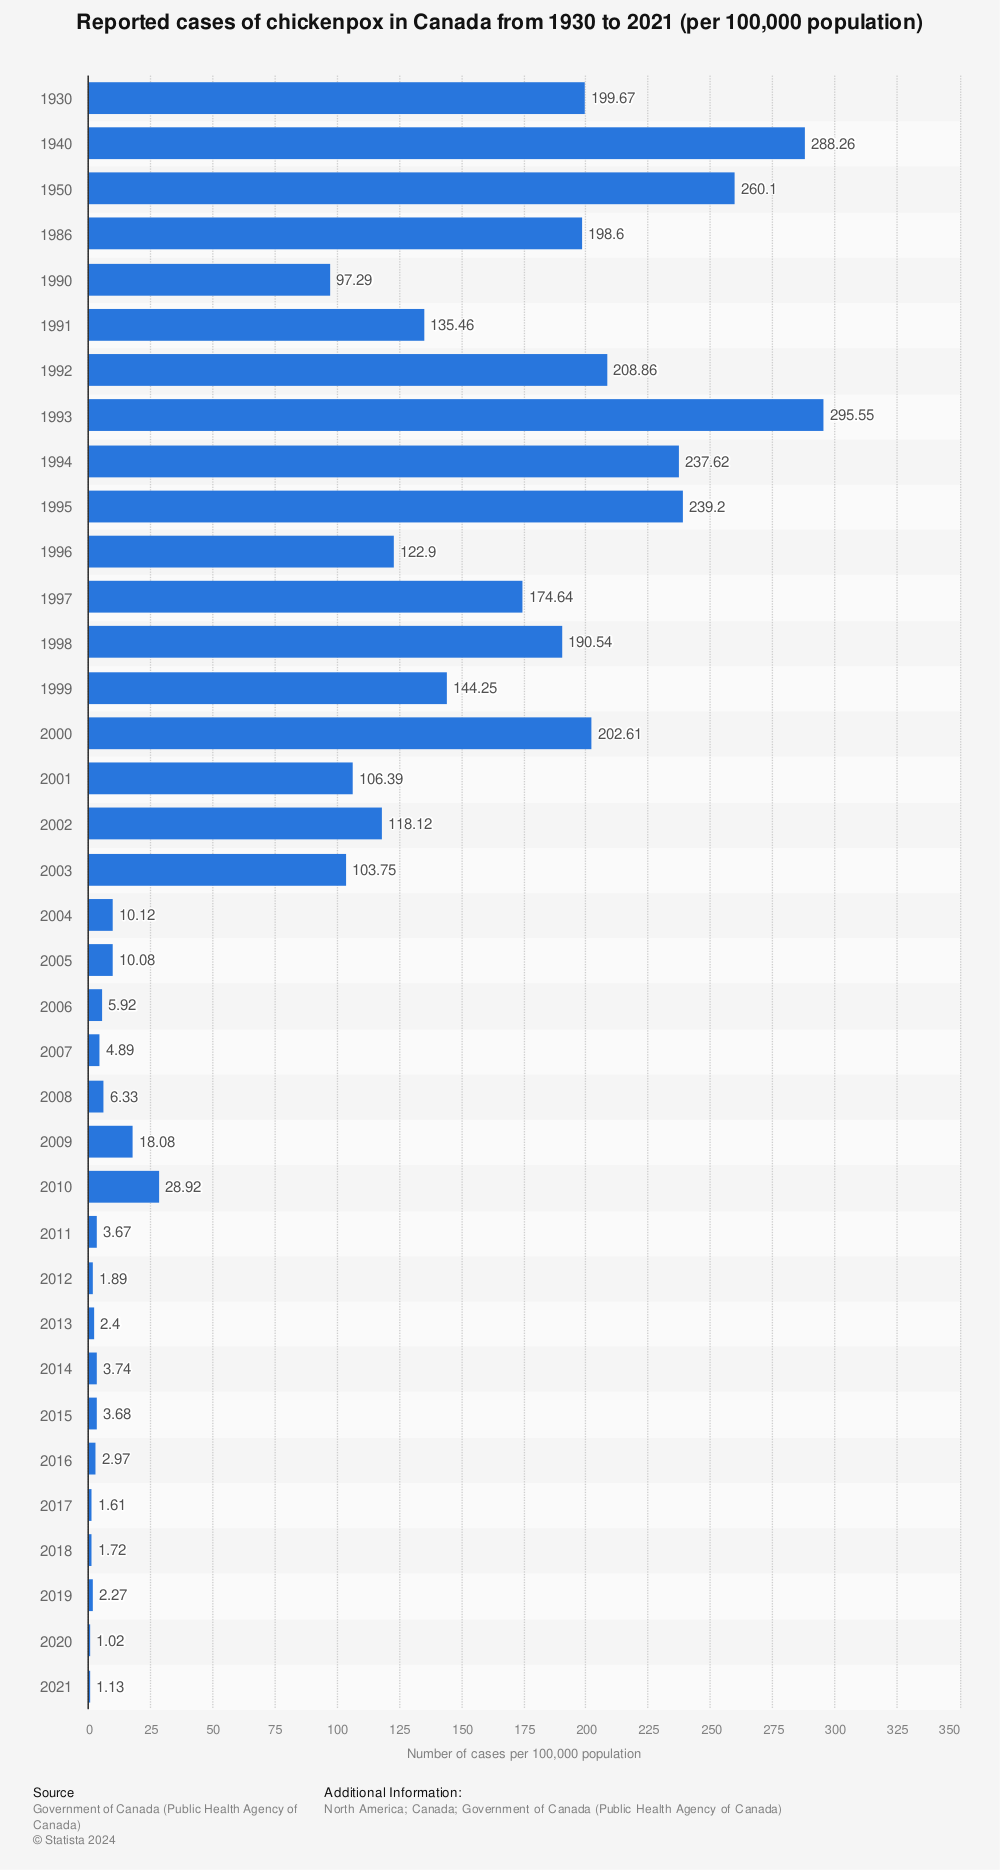 Statistic: Reported cases of chickenpox in Canada from 1930 to 2021 (per 100,000 population) | Statista